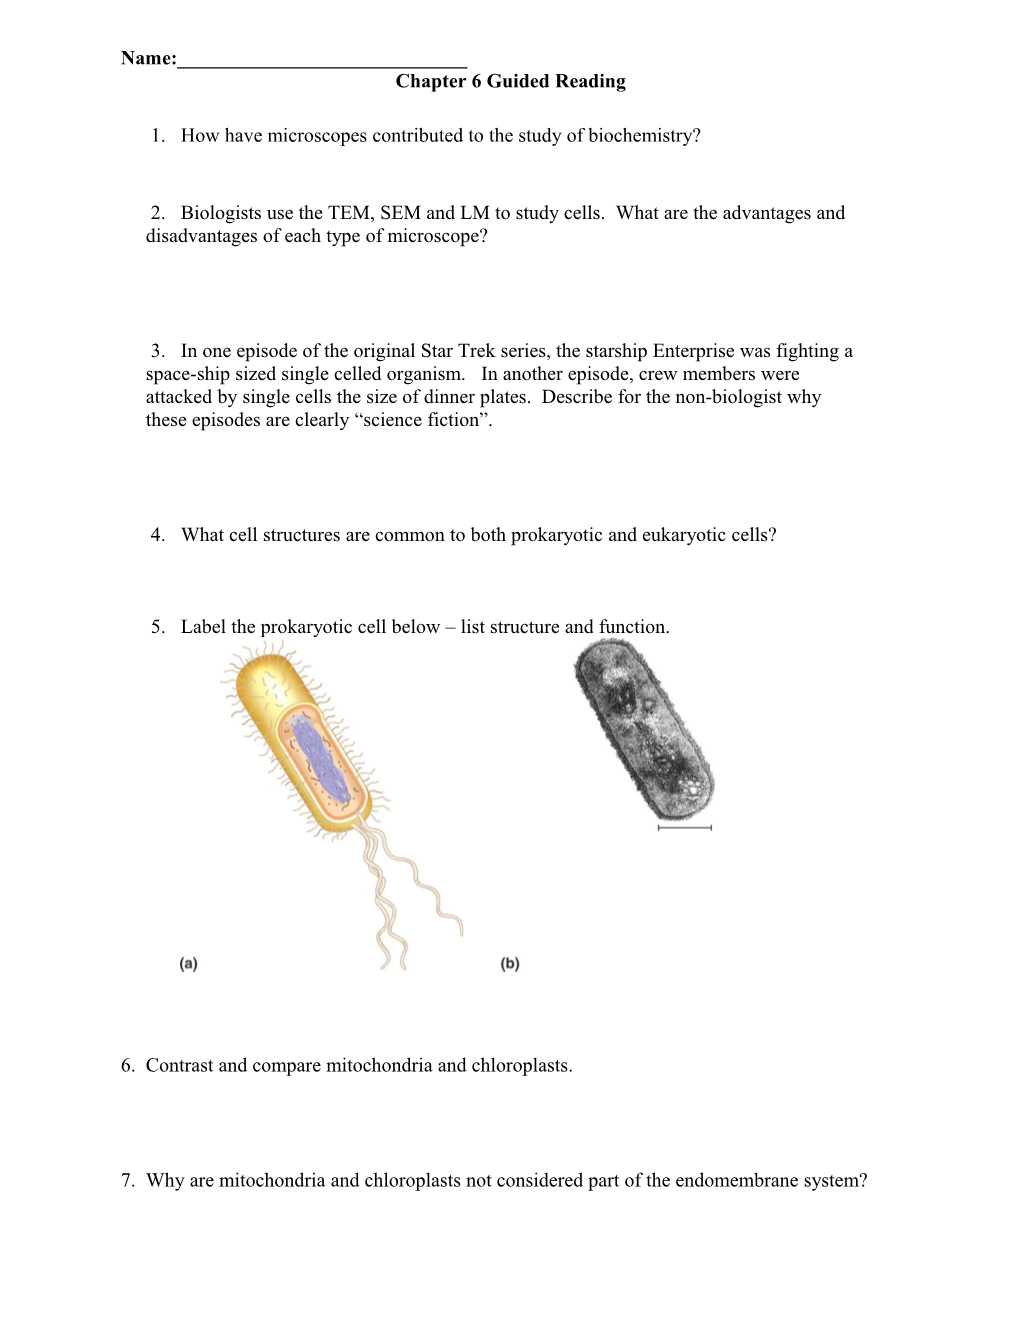 Chapter 7 a Tour of the Cell Homework